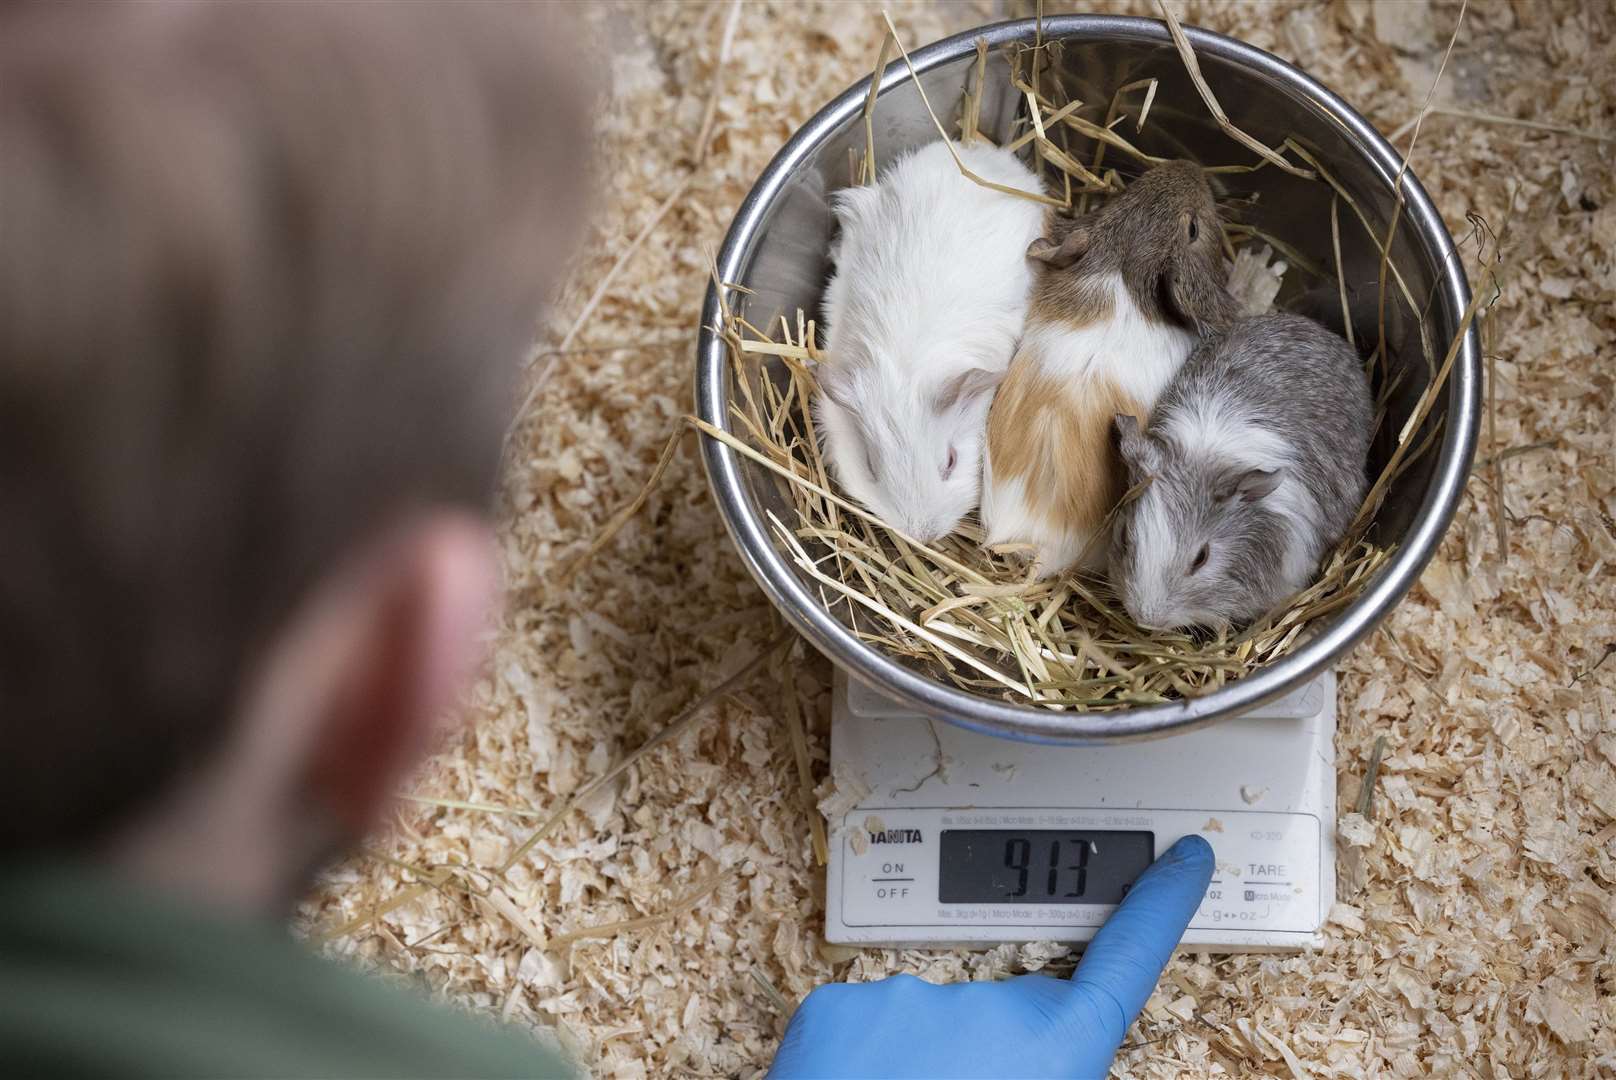 Guinea pigs are weighed during the annual animal health check at Chessington World of Adventures Resort in Surrey (Matt Alexander/PA)